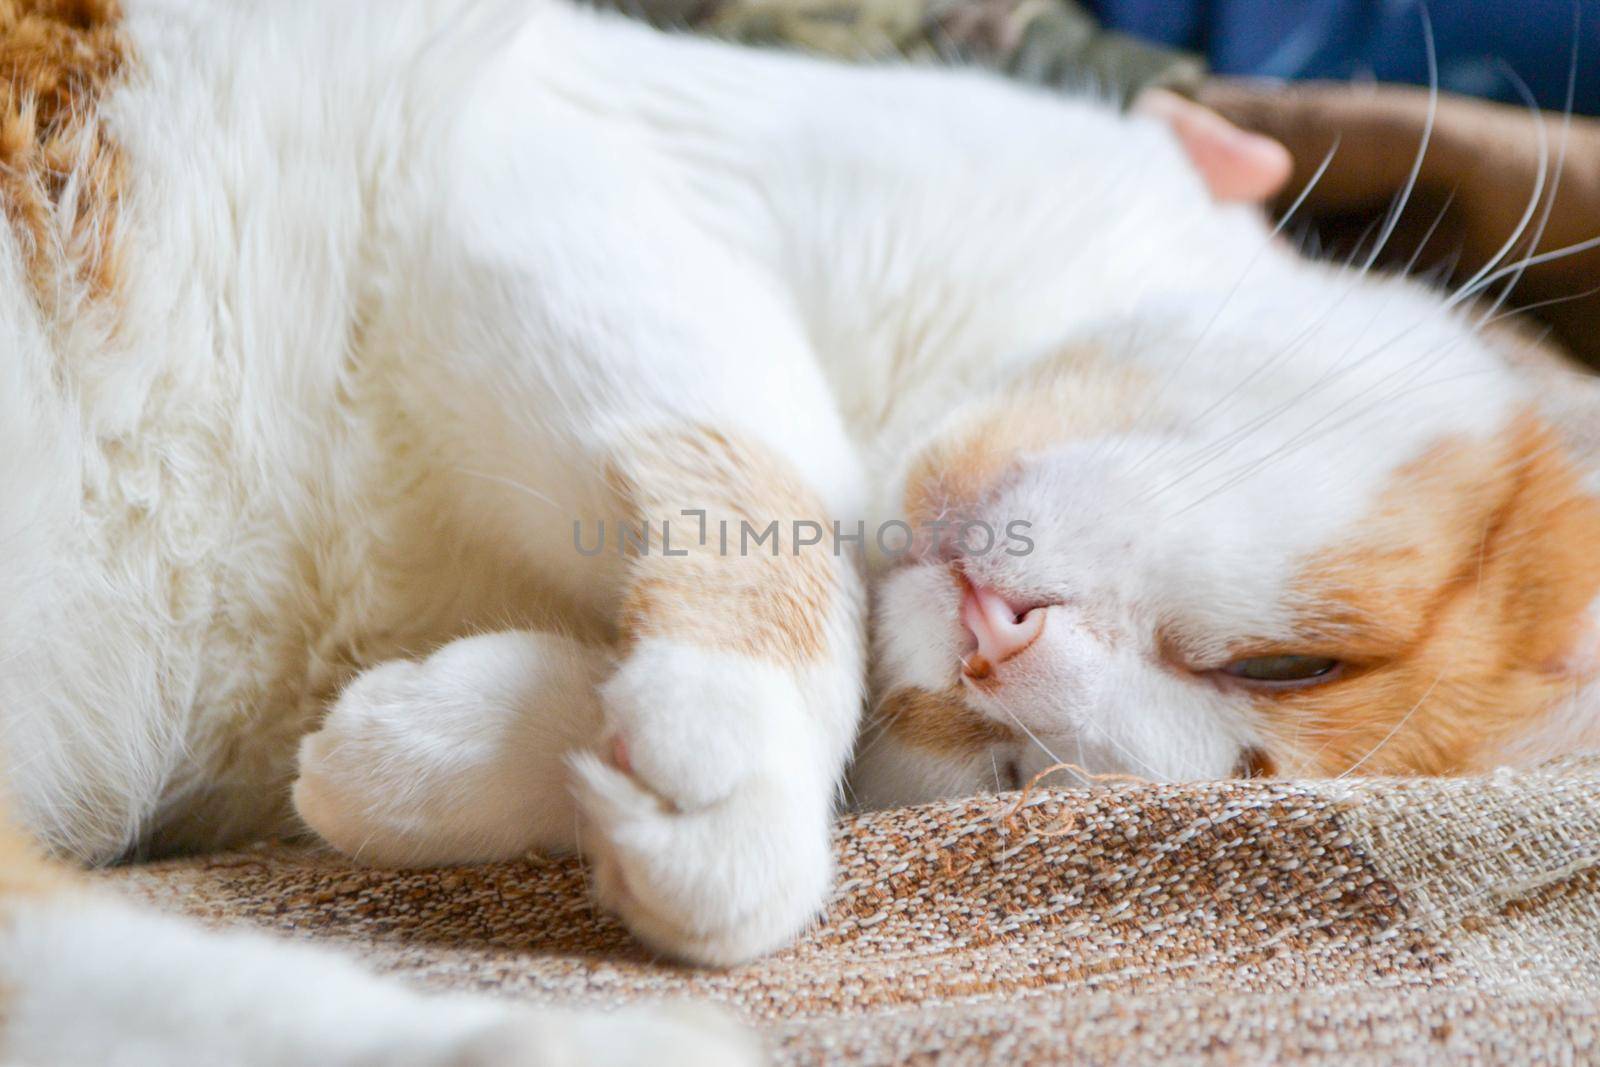 Red cat with white spots sleepy. The close up view of relax red cat. Cat paw close up. Domestic pet resting. Soft cat's foot. High quality photo